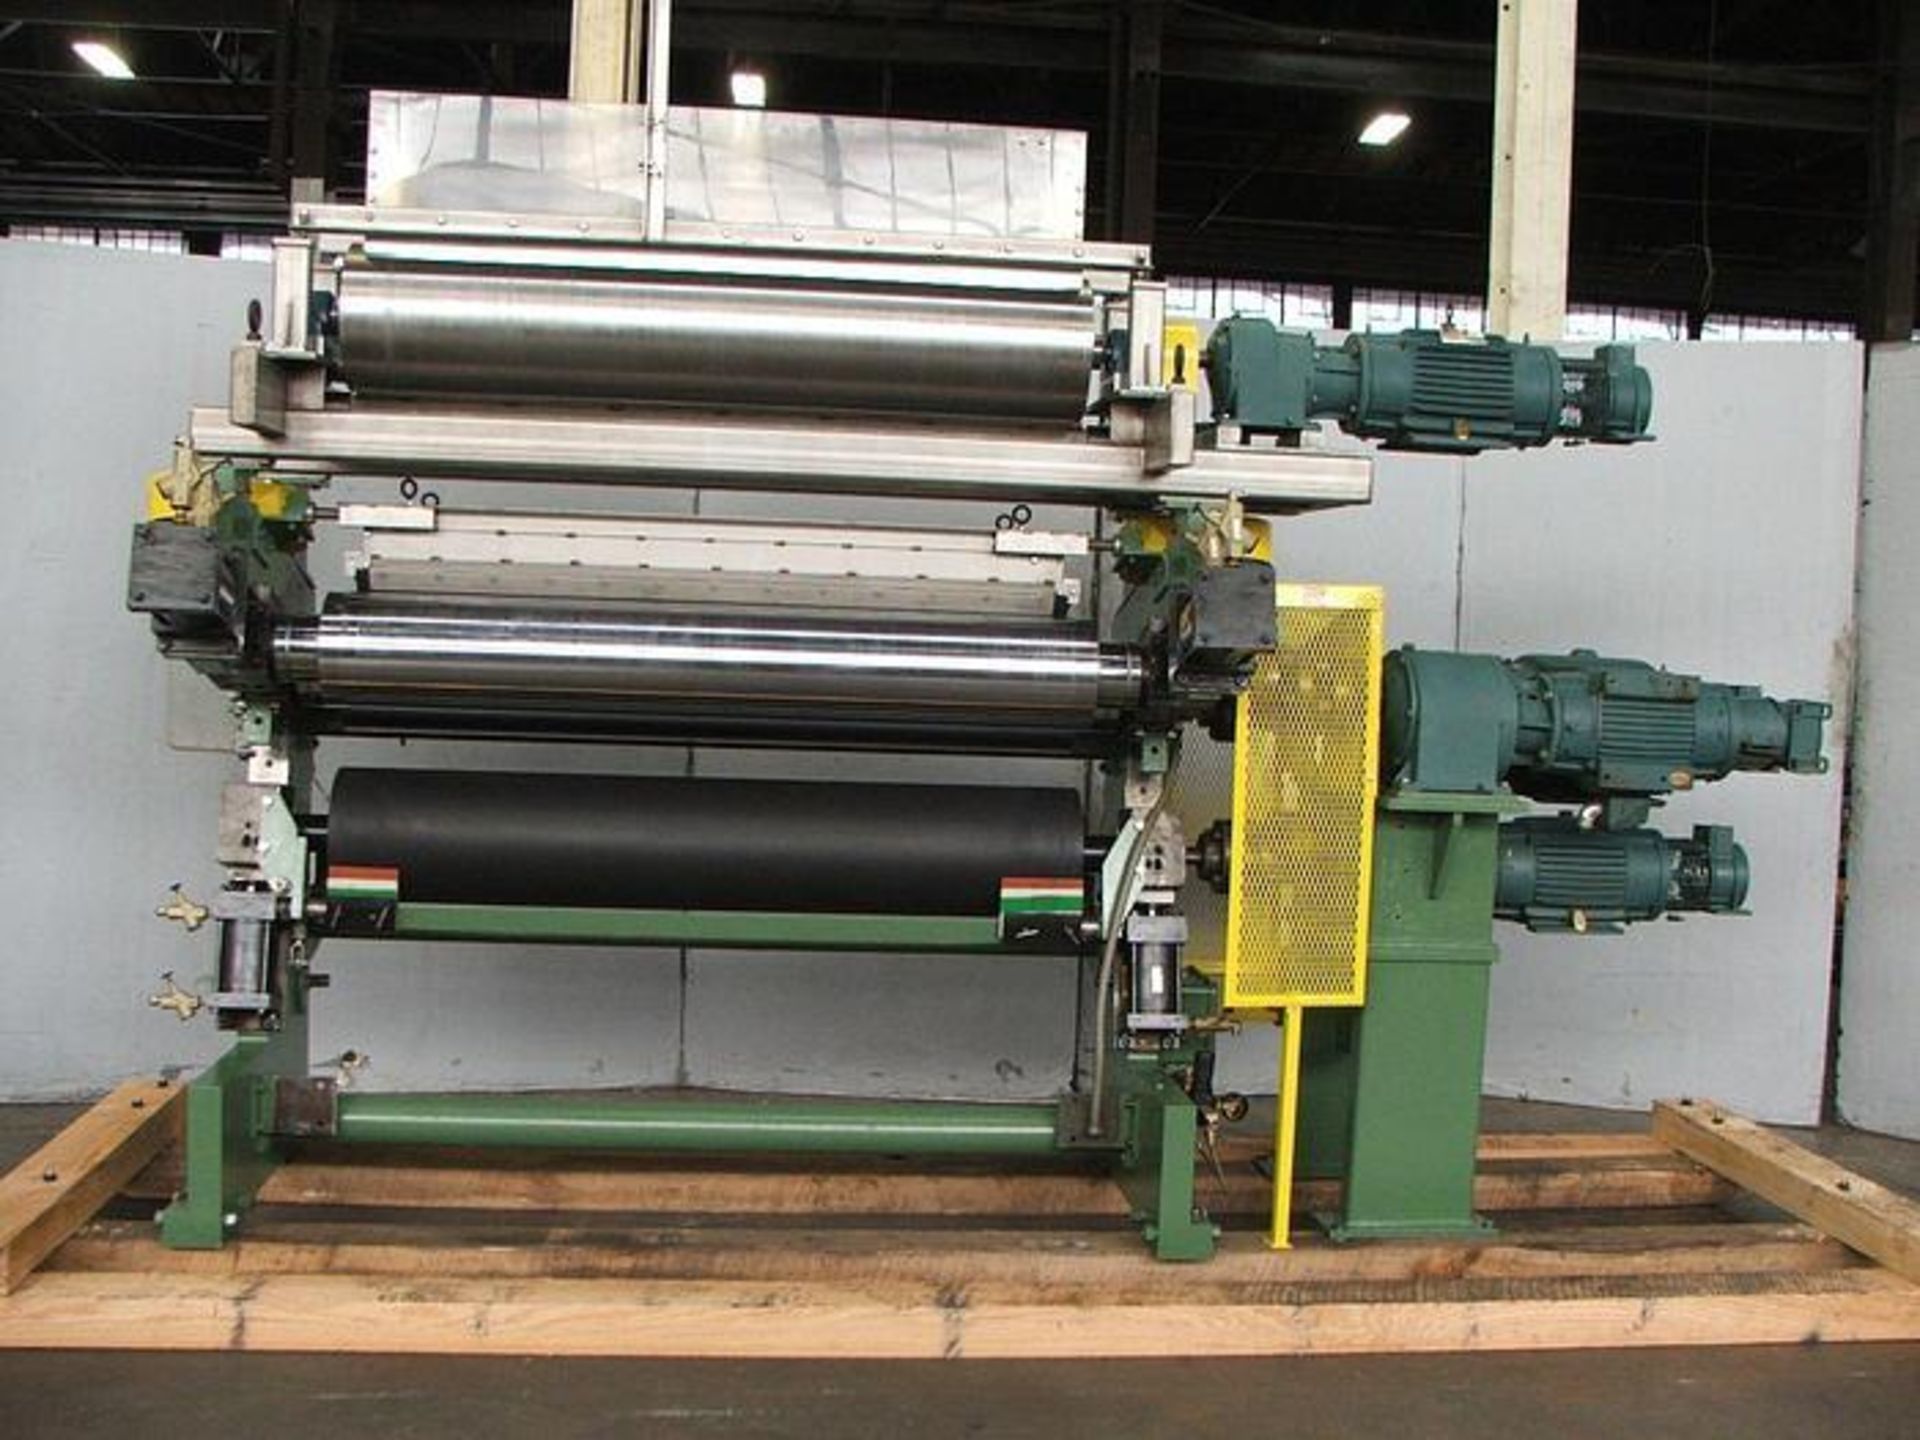 60" WALDRON / ROSS AIR SYSTEMS REVERSE ROLL COATING STATION